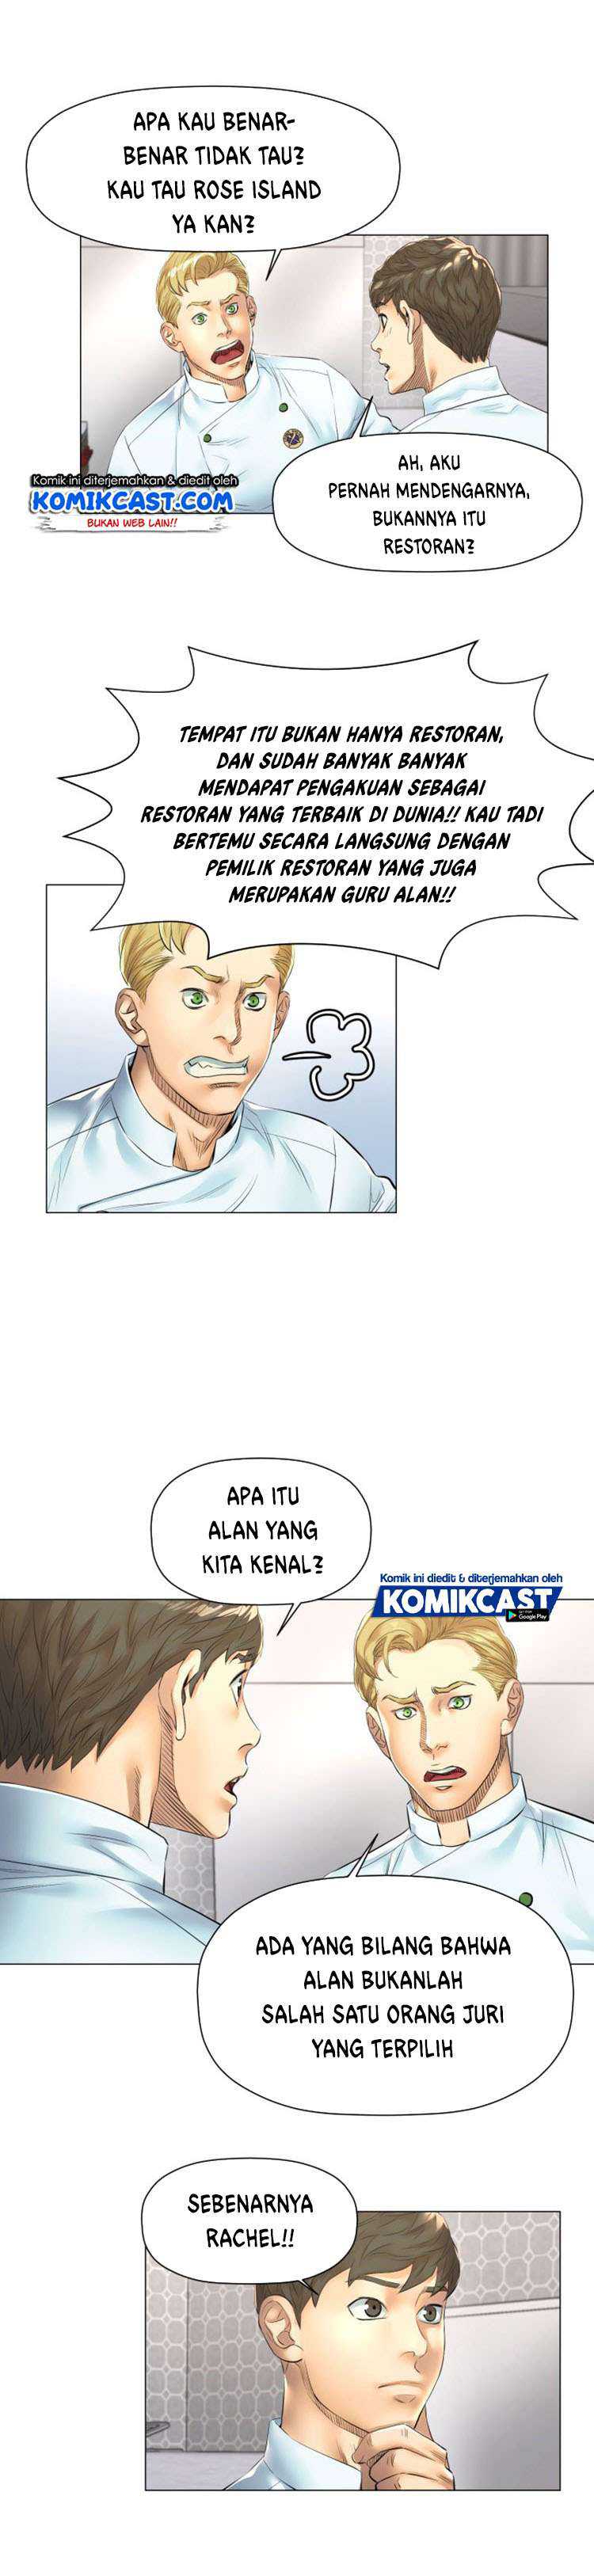 God of Cooking Chapter 28